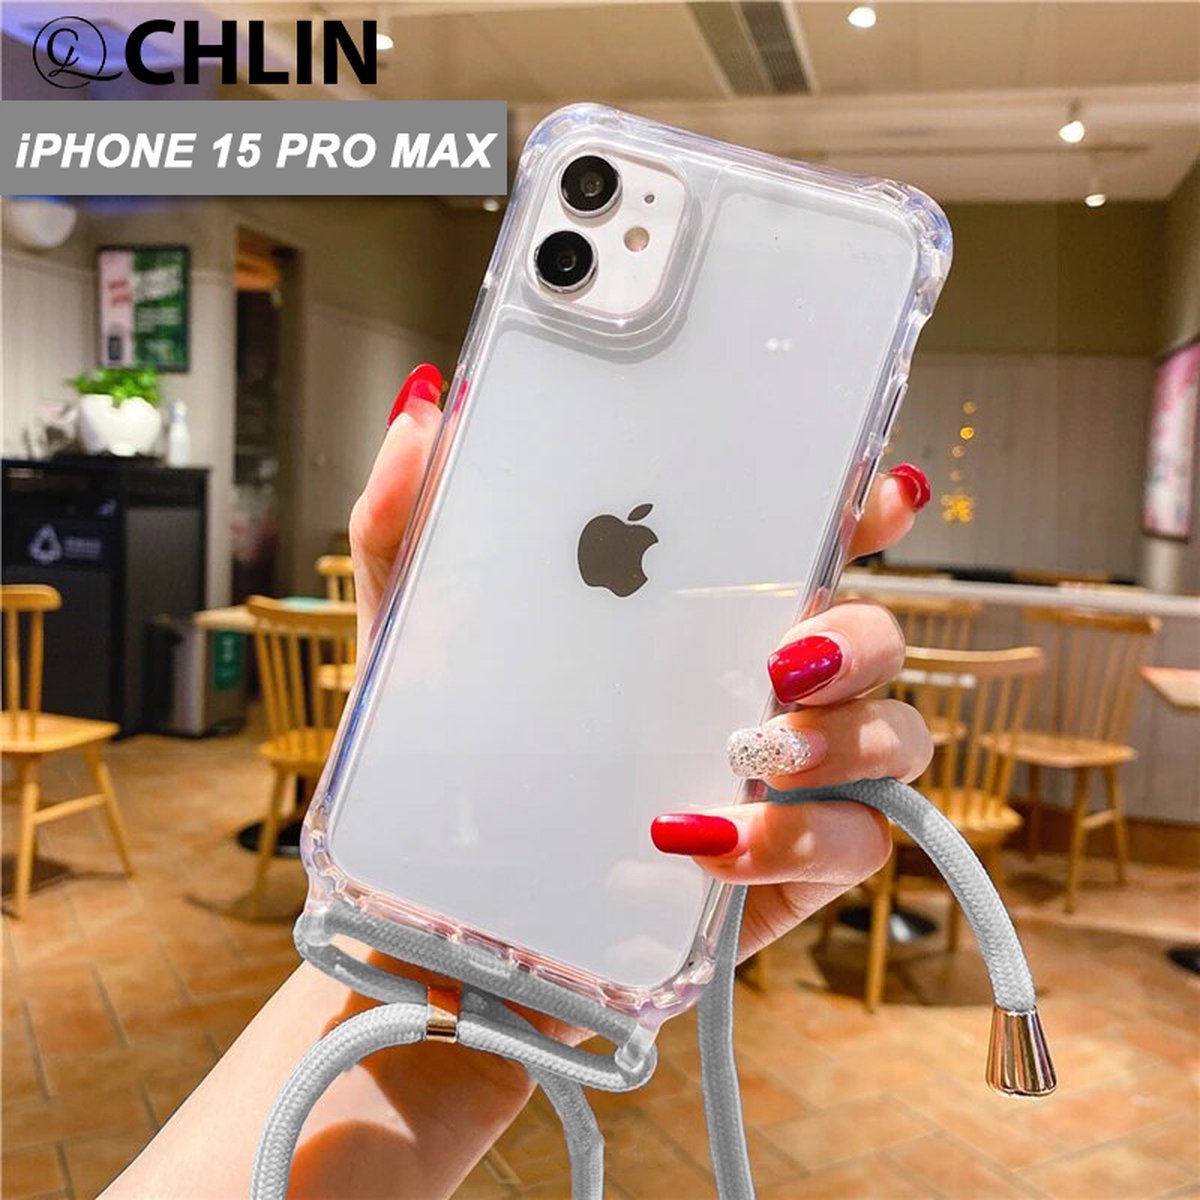 CL CHLIN® - iPhone 15 Pro Max transparant hoesje met GRIJS koord - Hoesje met koord iPhone 15 Pro Max - iPhone 15 Pro Max case - iPhone 15 Pro Max hoes - iPhone hoesje met cord - iPhone 15 Pro Max bescherming - iPhone 15 Pro Max protector